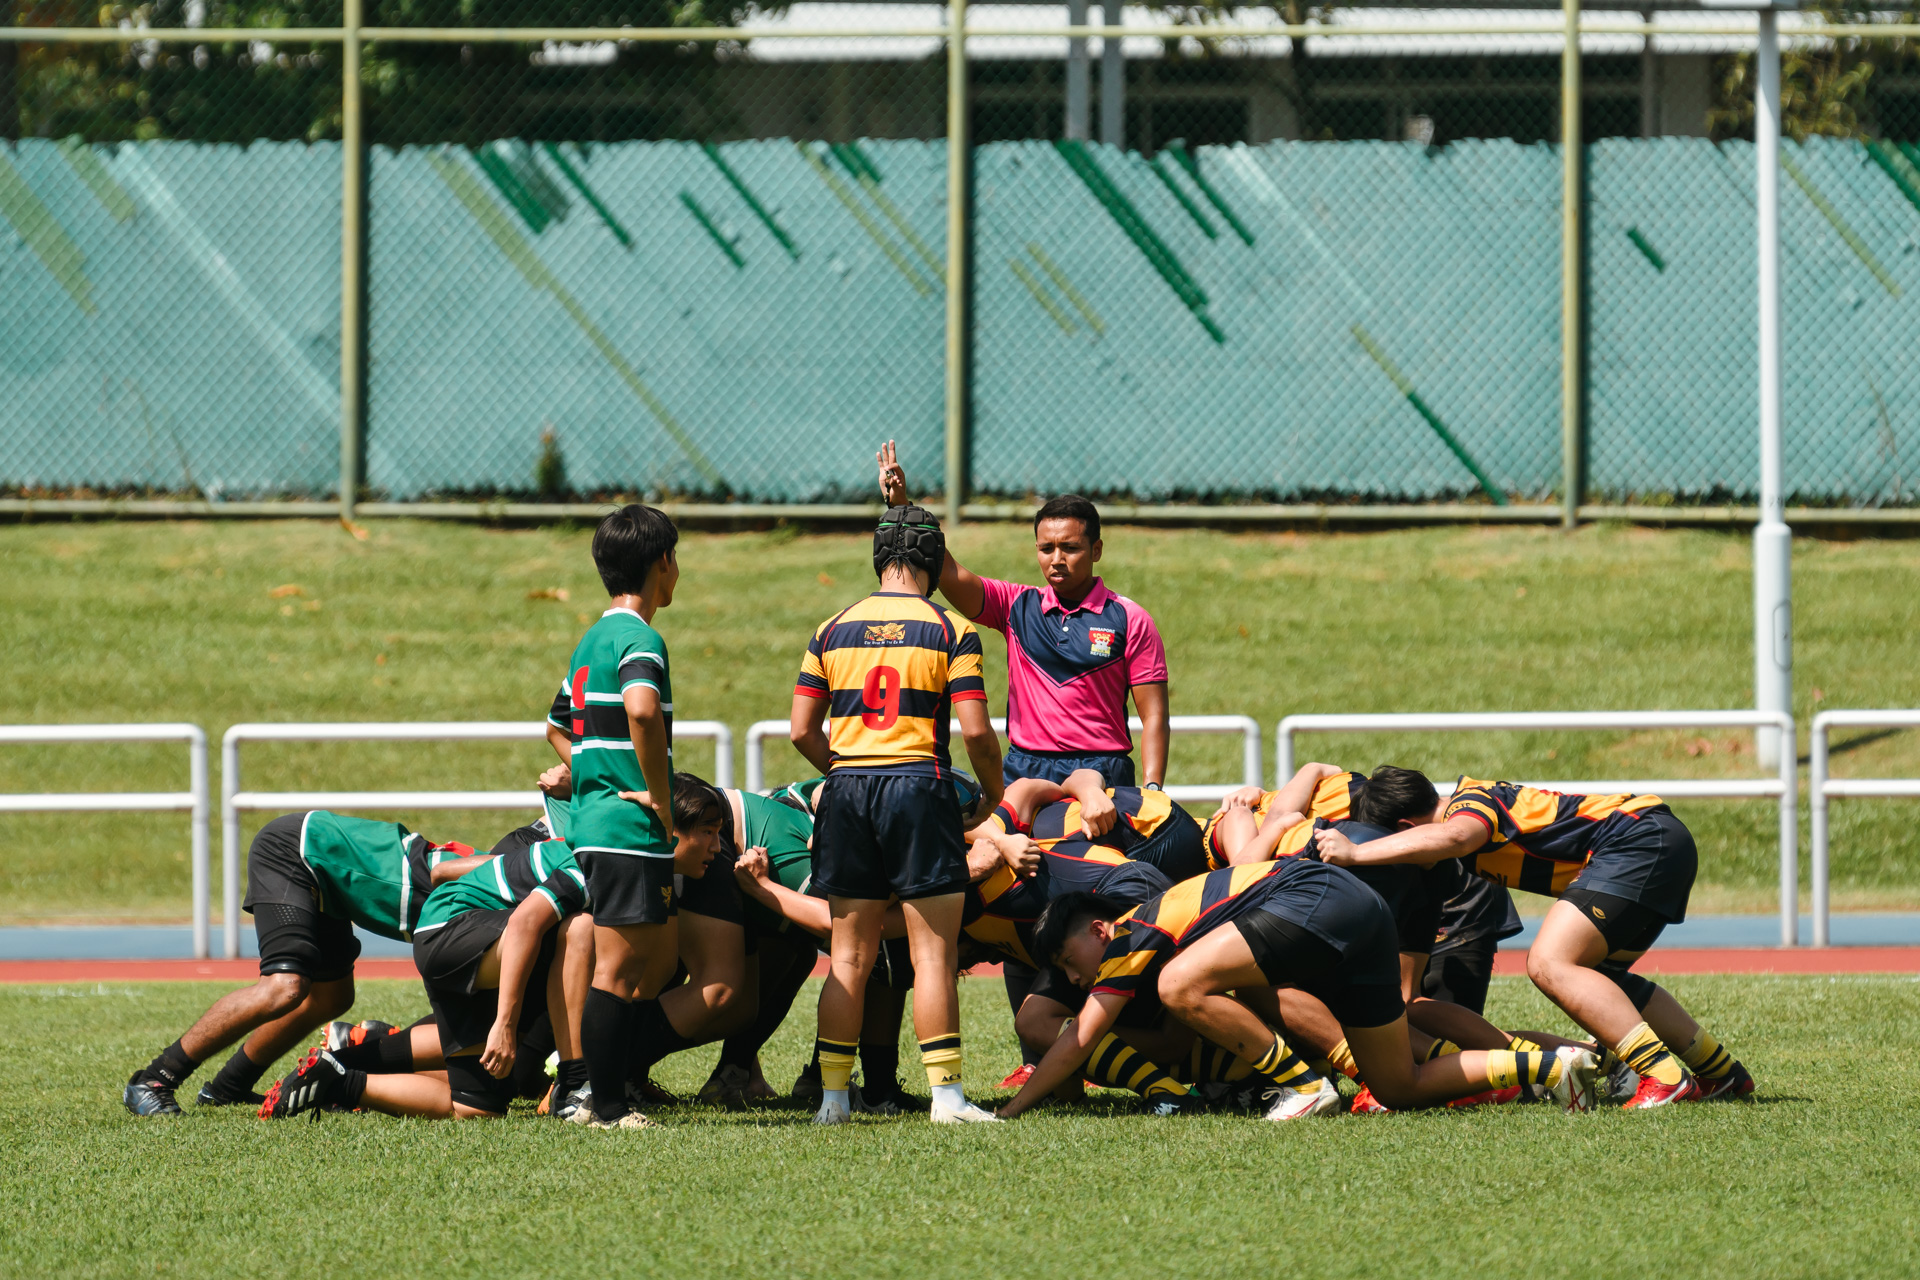 The forwards formed up and about to engage in a scrum. (Photo 7 © Joash Chow/Red Sports)